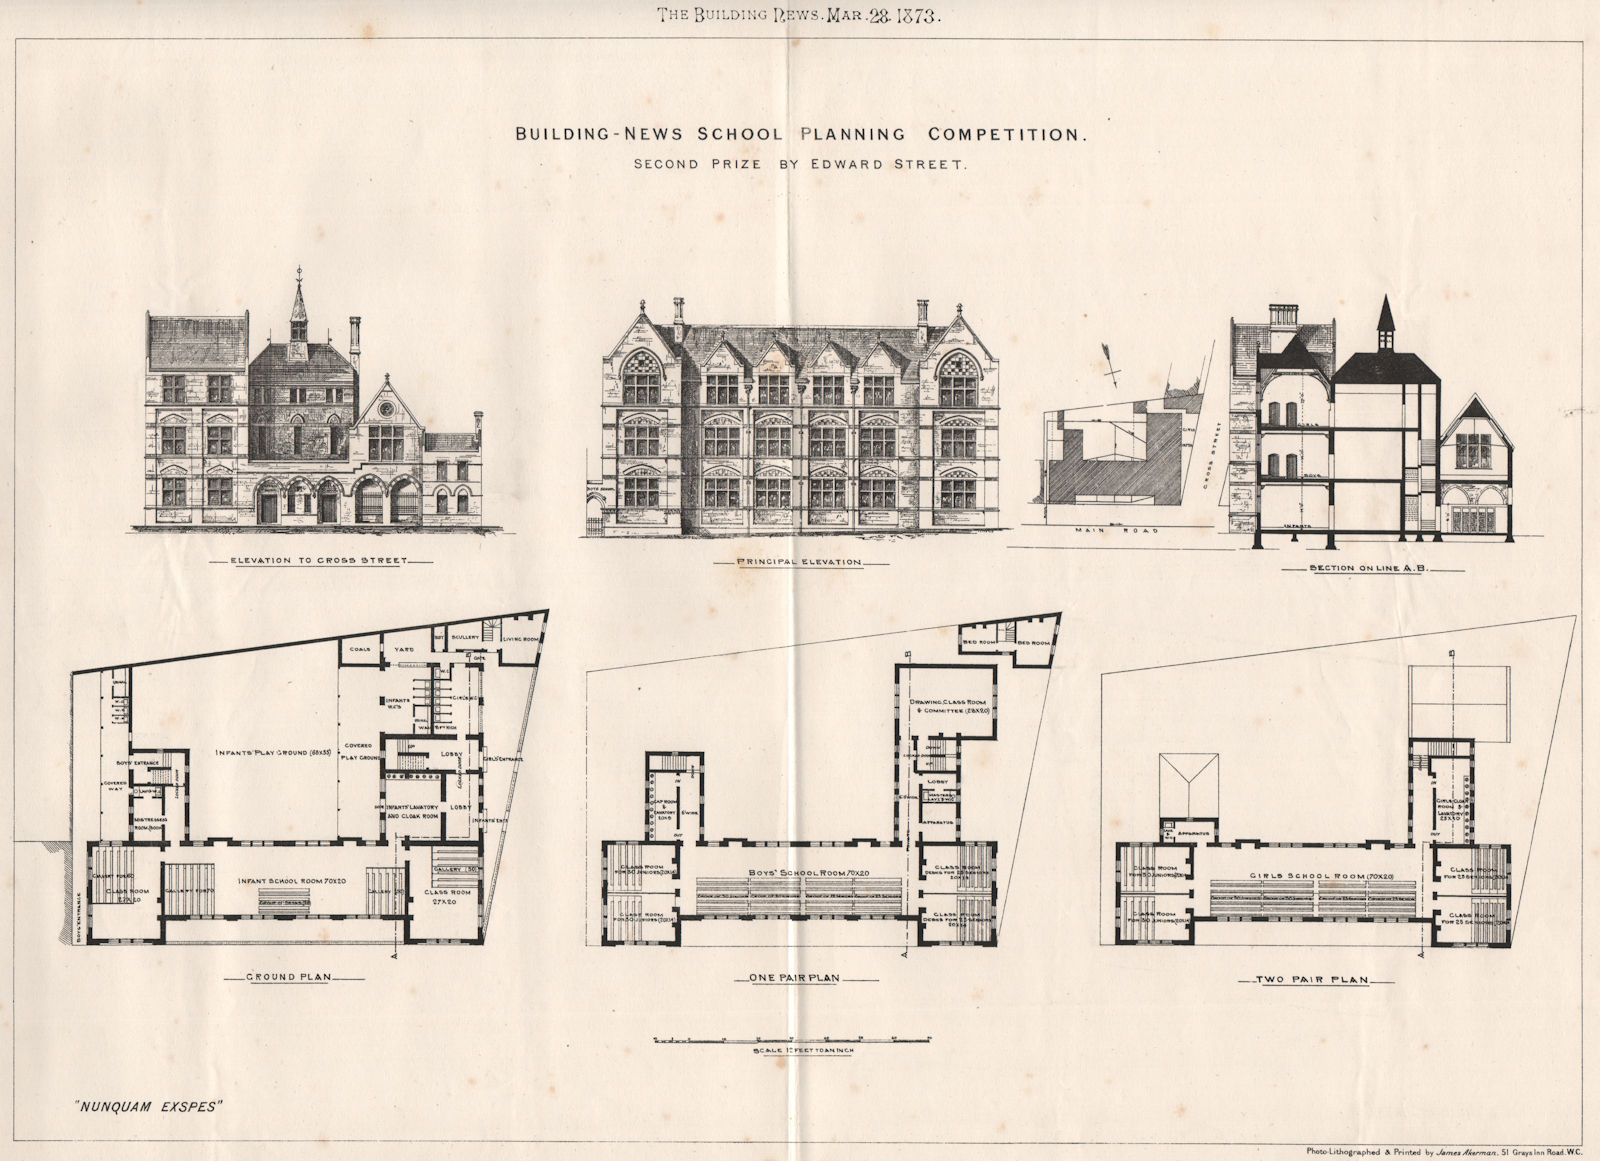 Associate Product Building News School Planning Competition. Second Prize Edward Street 1873